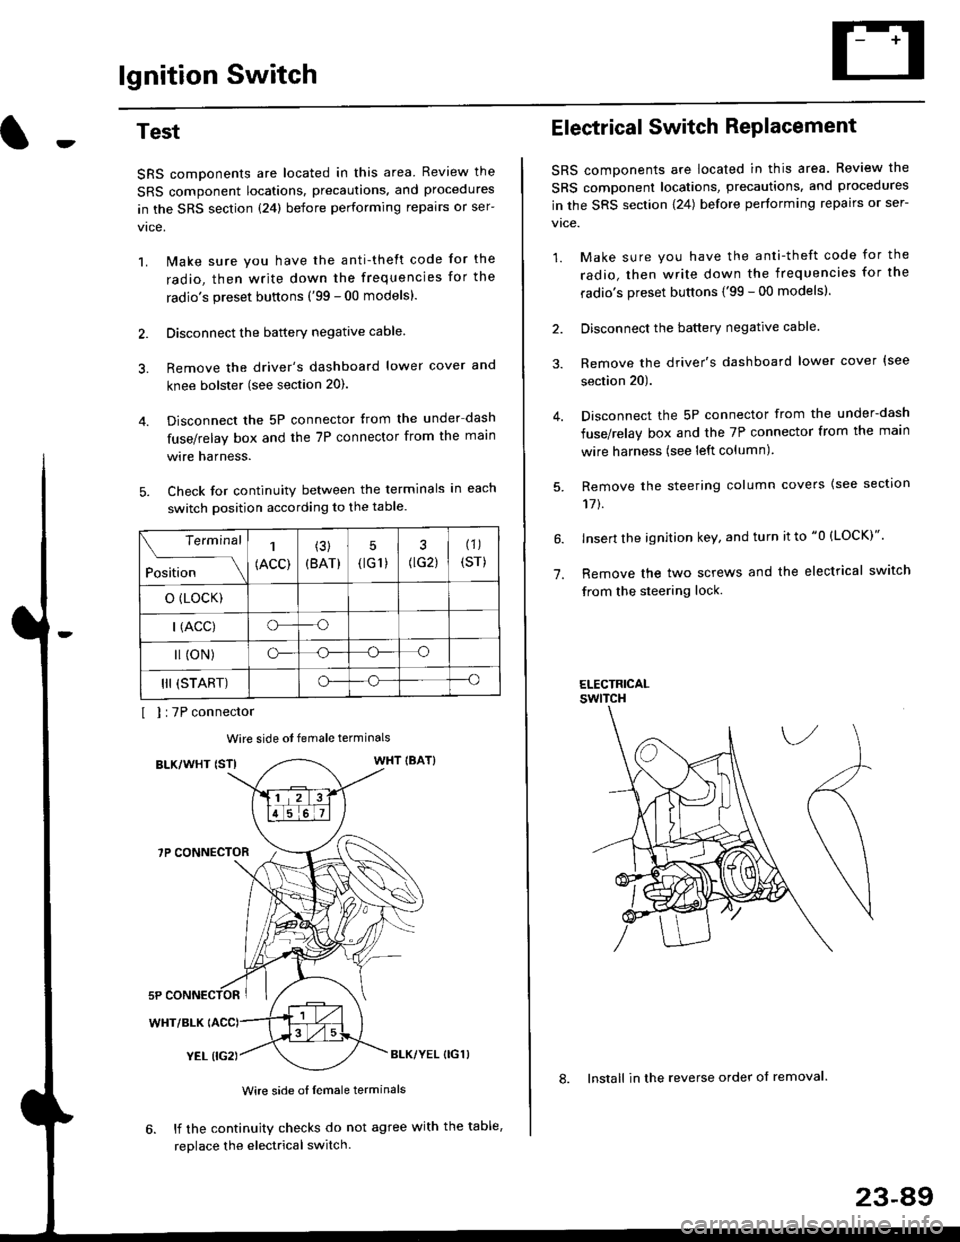 HONDA CIVIC 1997 6.G Workshop Manual lgnition Switch
4.
Test
SRS components are located in this area Review the
SRS component locations. precautions. and procedures
in the SRS section {24} before performing repairs or ser-
1. i/ake sure 